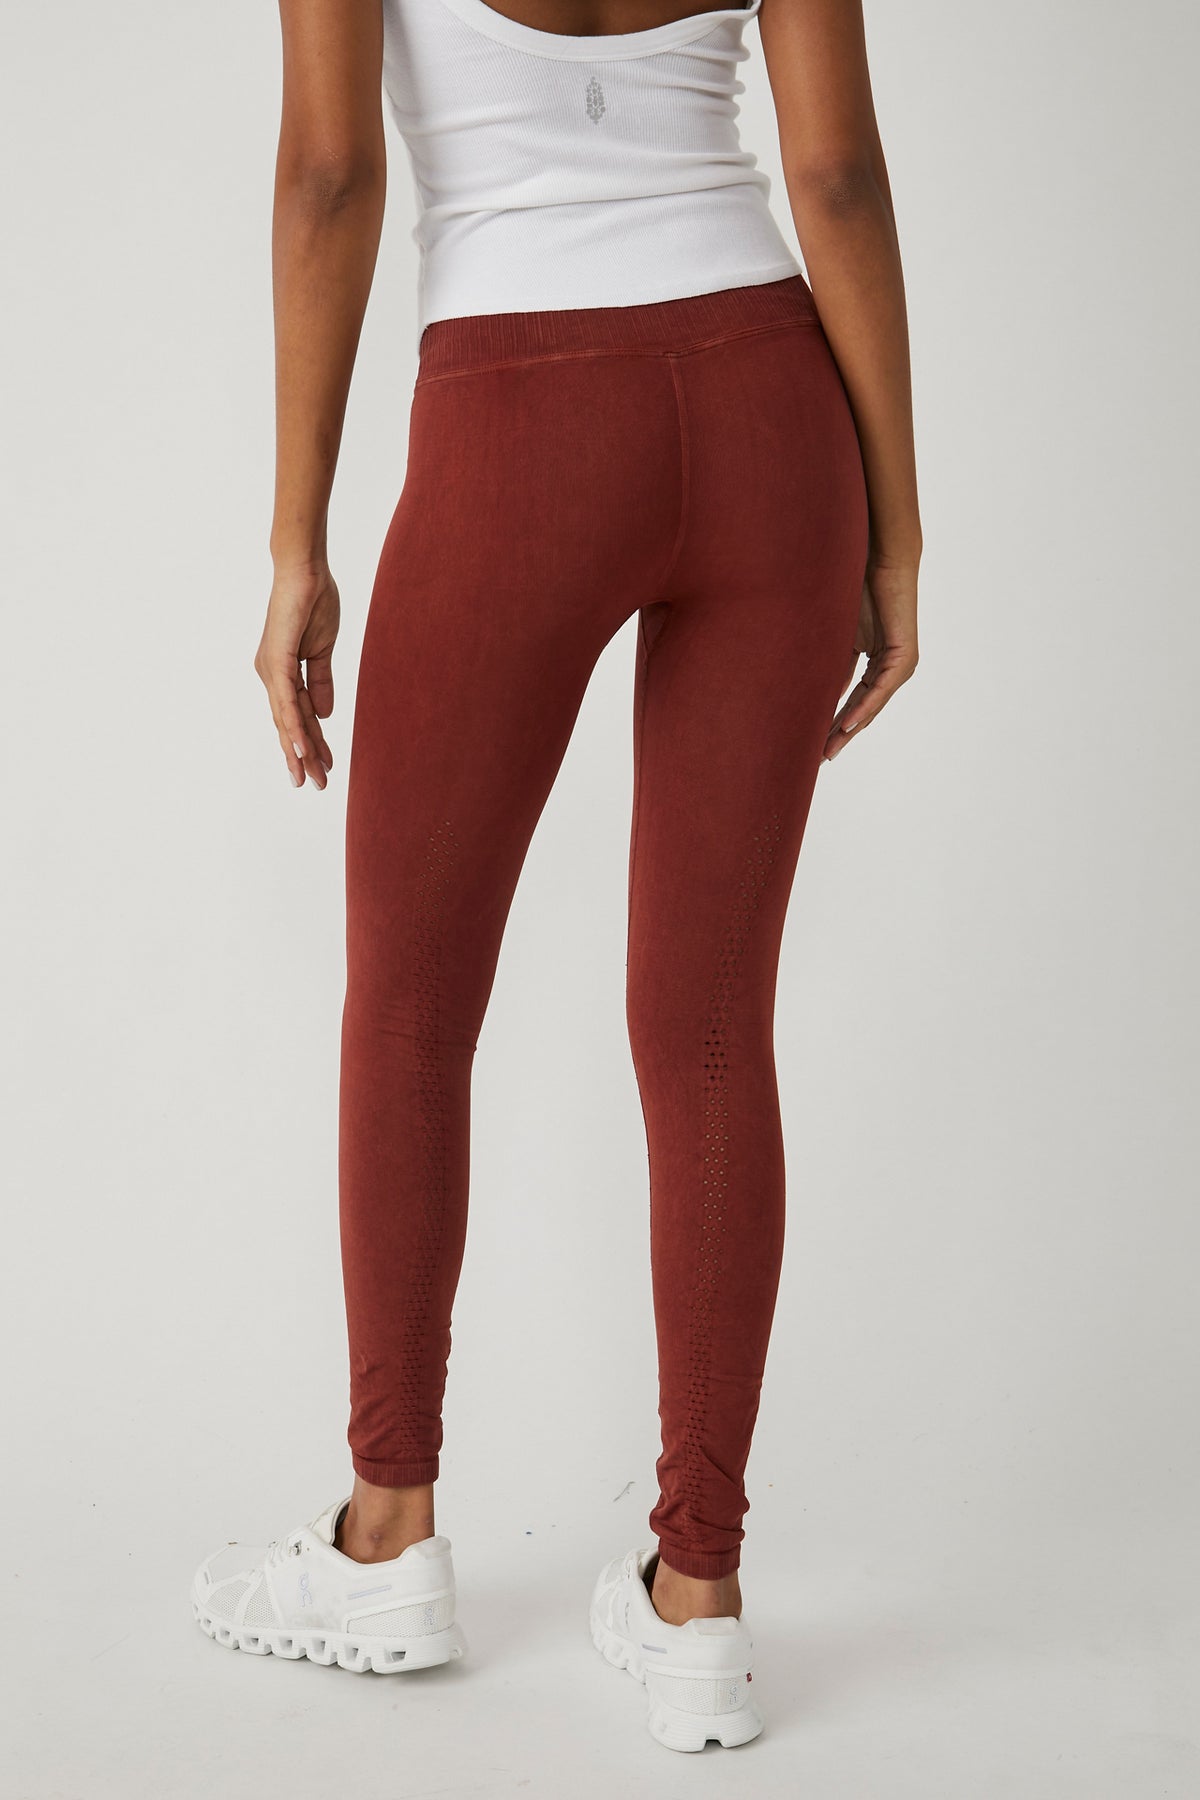 FREE PEOPLE MOVEMENT GOOD KARMA LEGGING RED EARTH NEW!! – Bubble